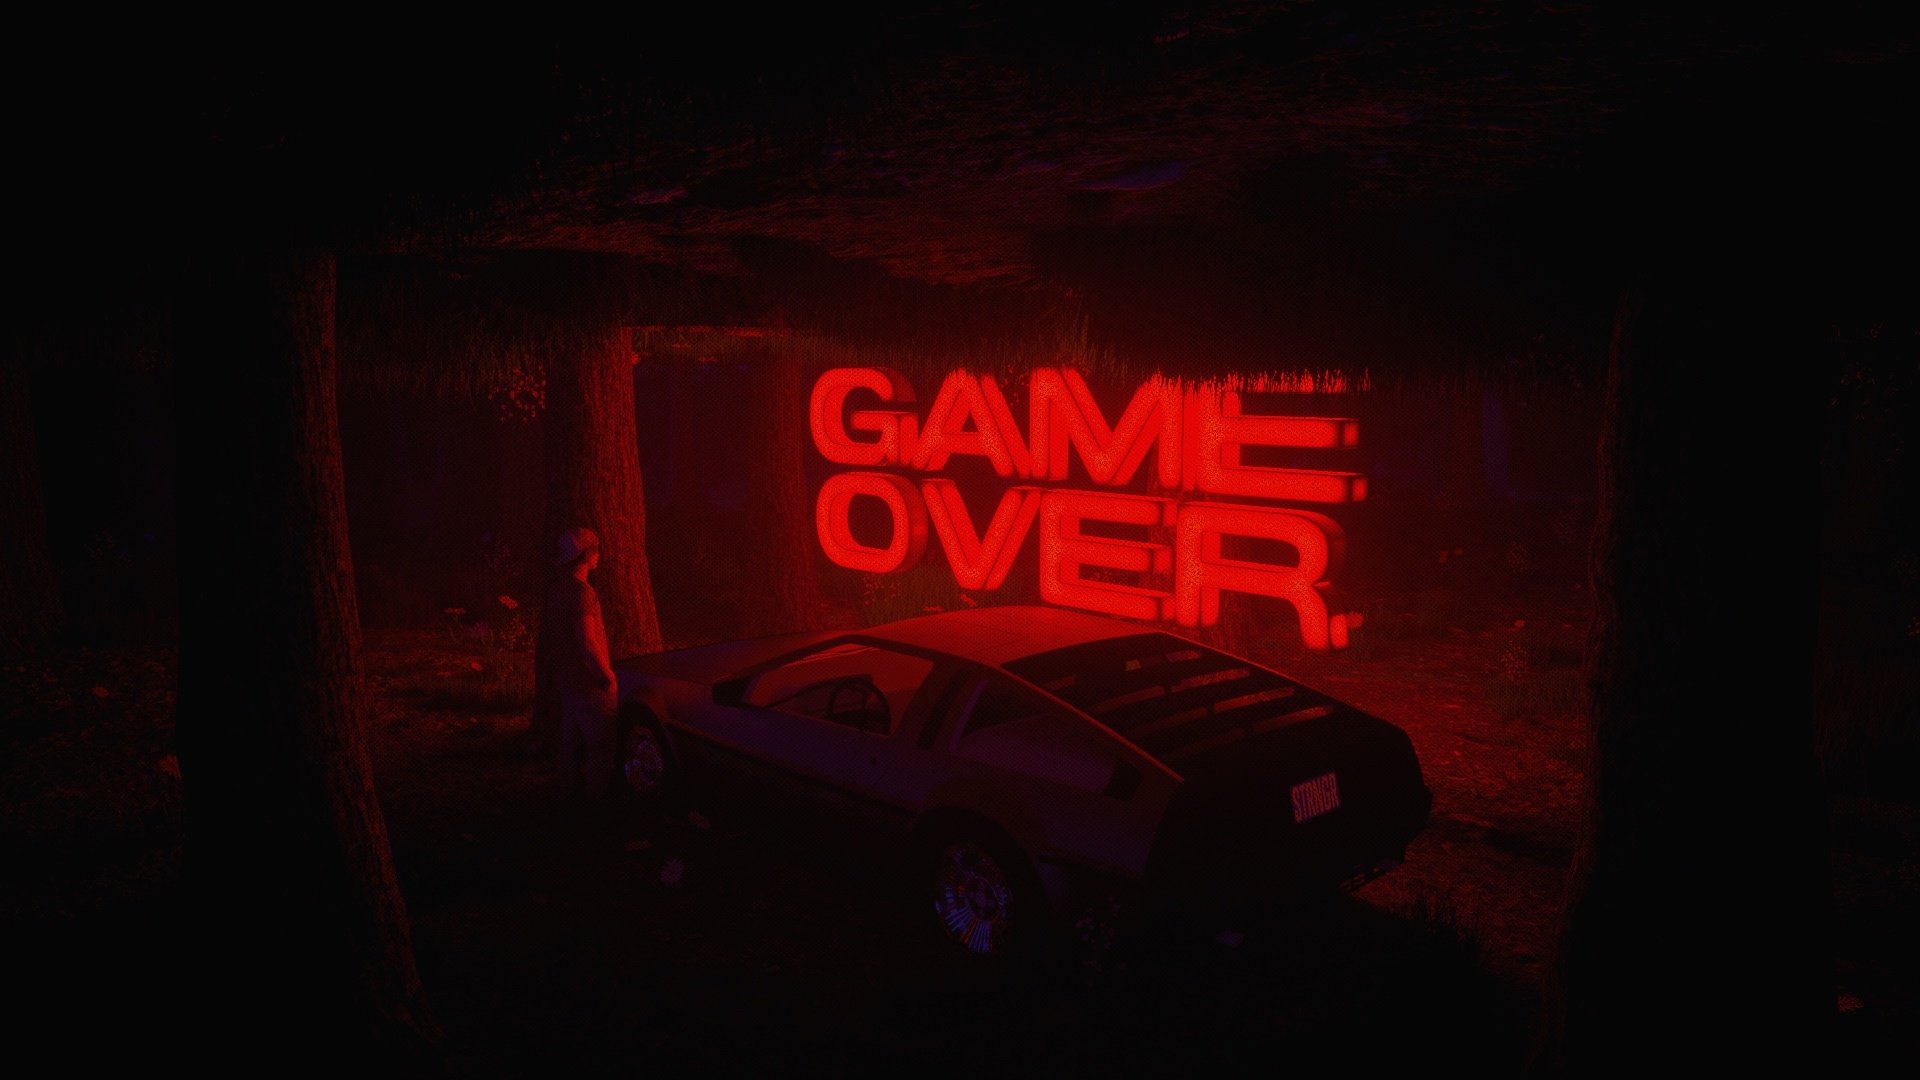  Game  Over  HD Wallpaper  Background Image 1920x1080 ID 